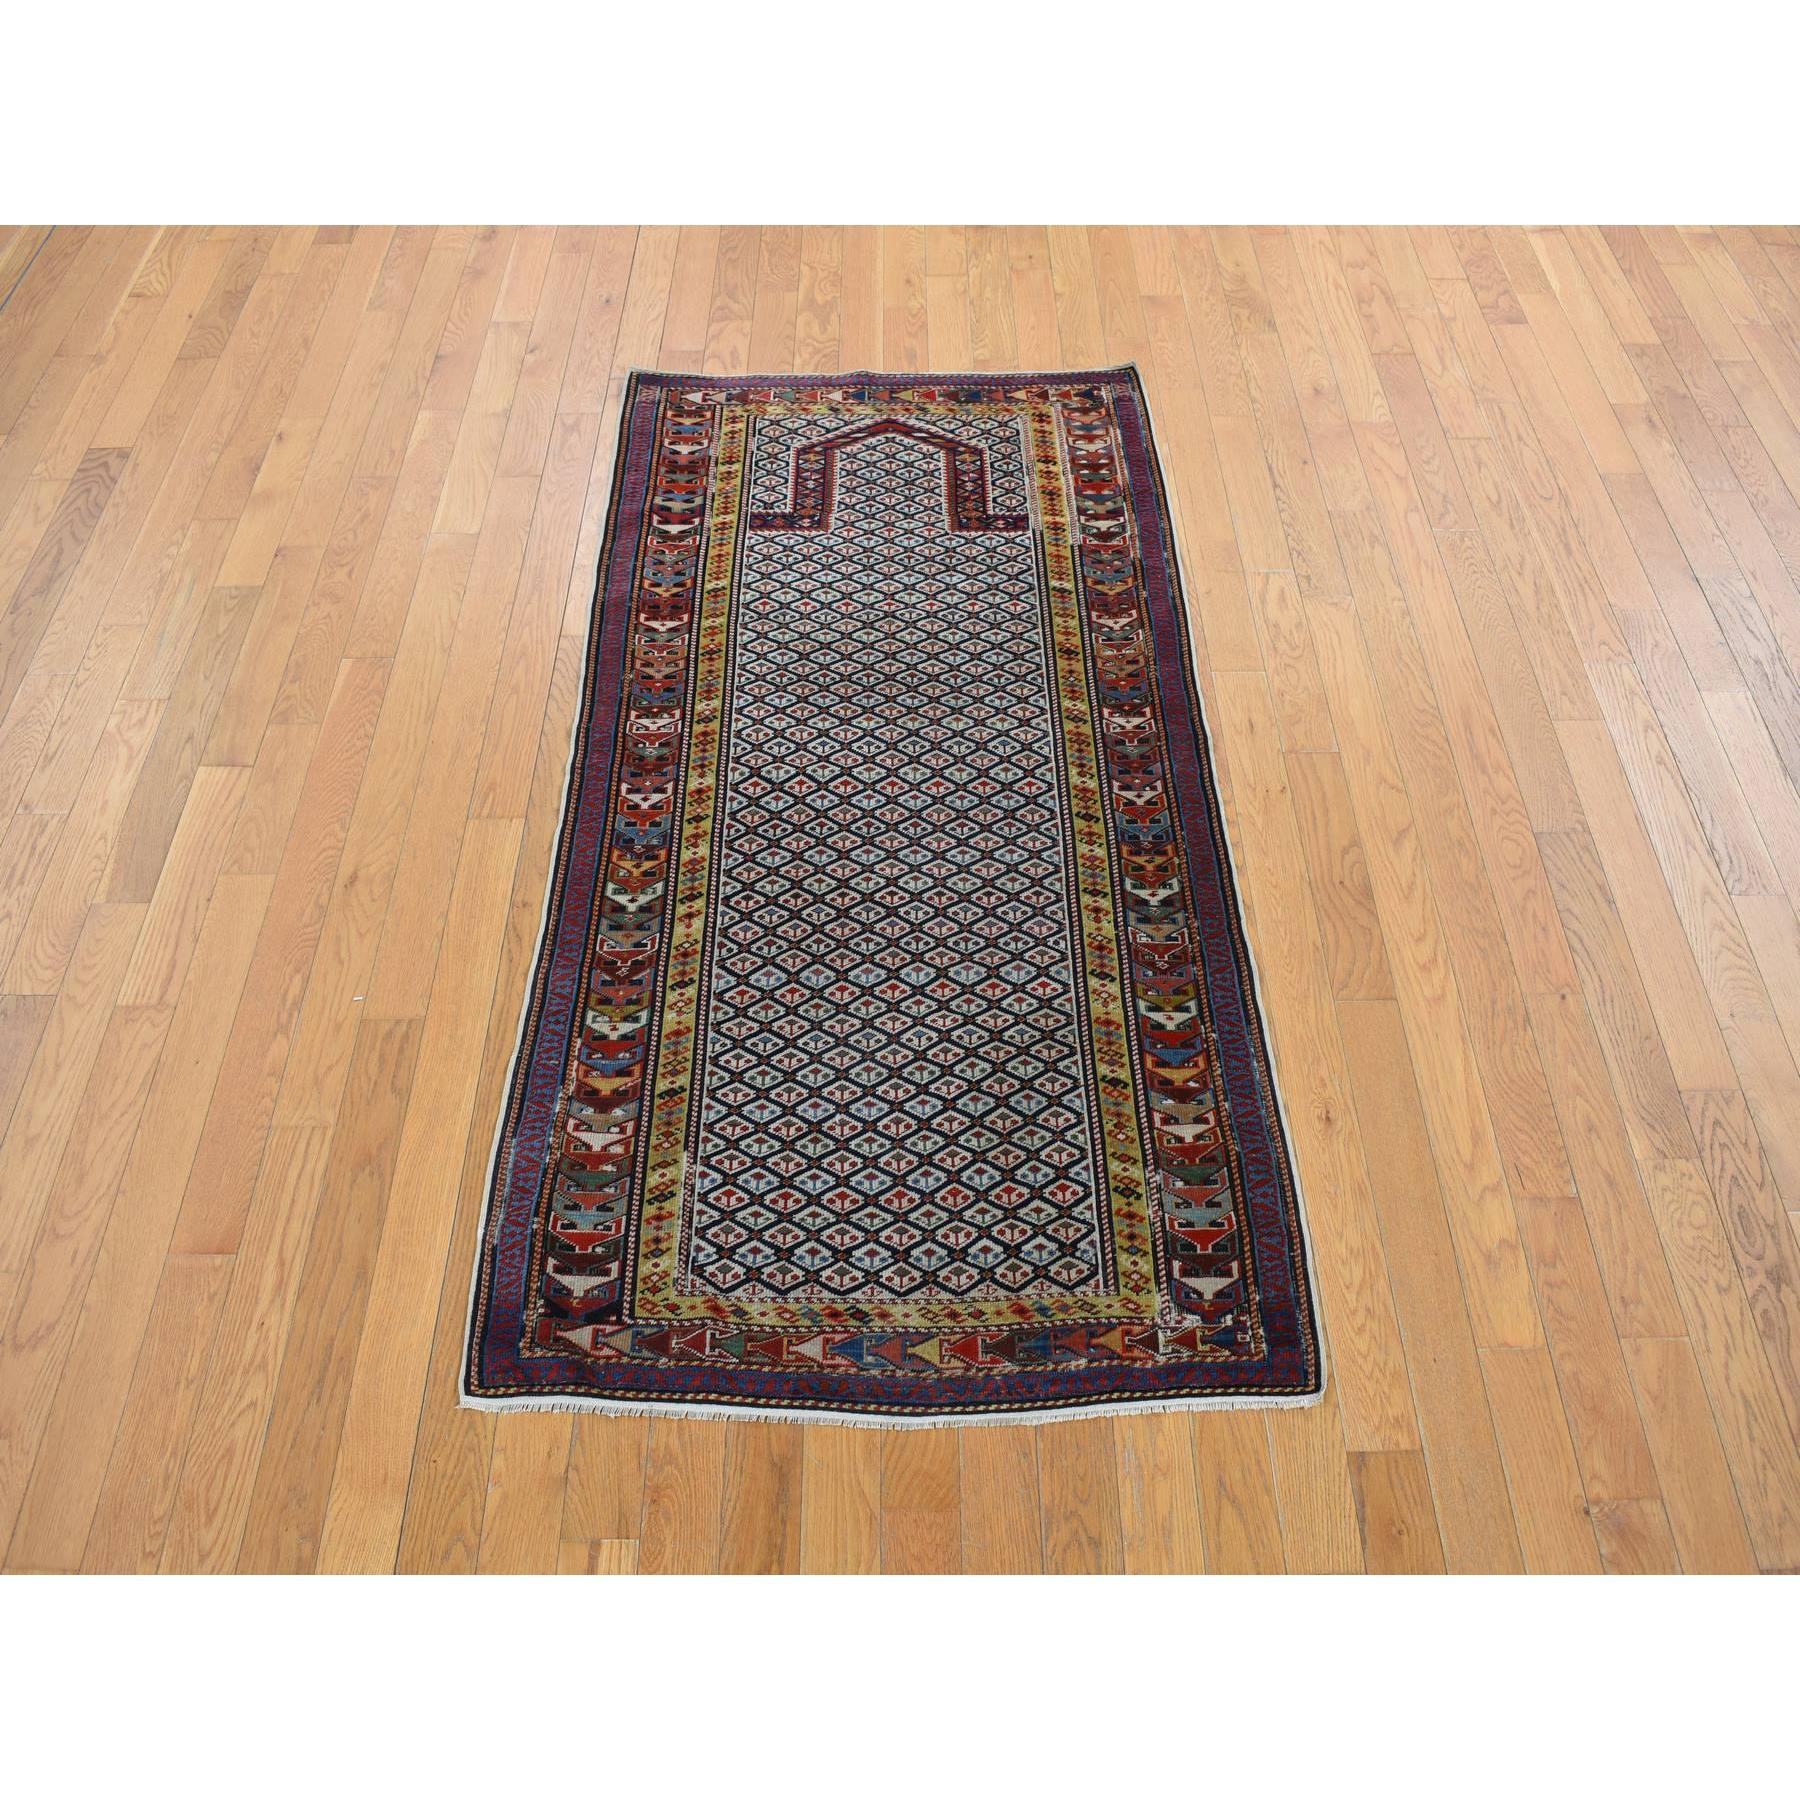 This fabulous Hand-Knotted carpet has been created and designed for extra strength and durability. This rug has been handcrafted for weeks in the traditional method that is used to make
Exact Rug Size in Feet and Inches : 3'1